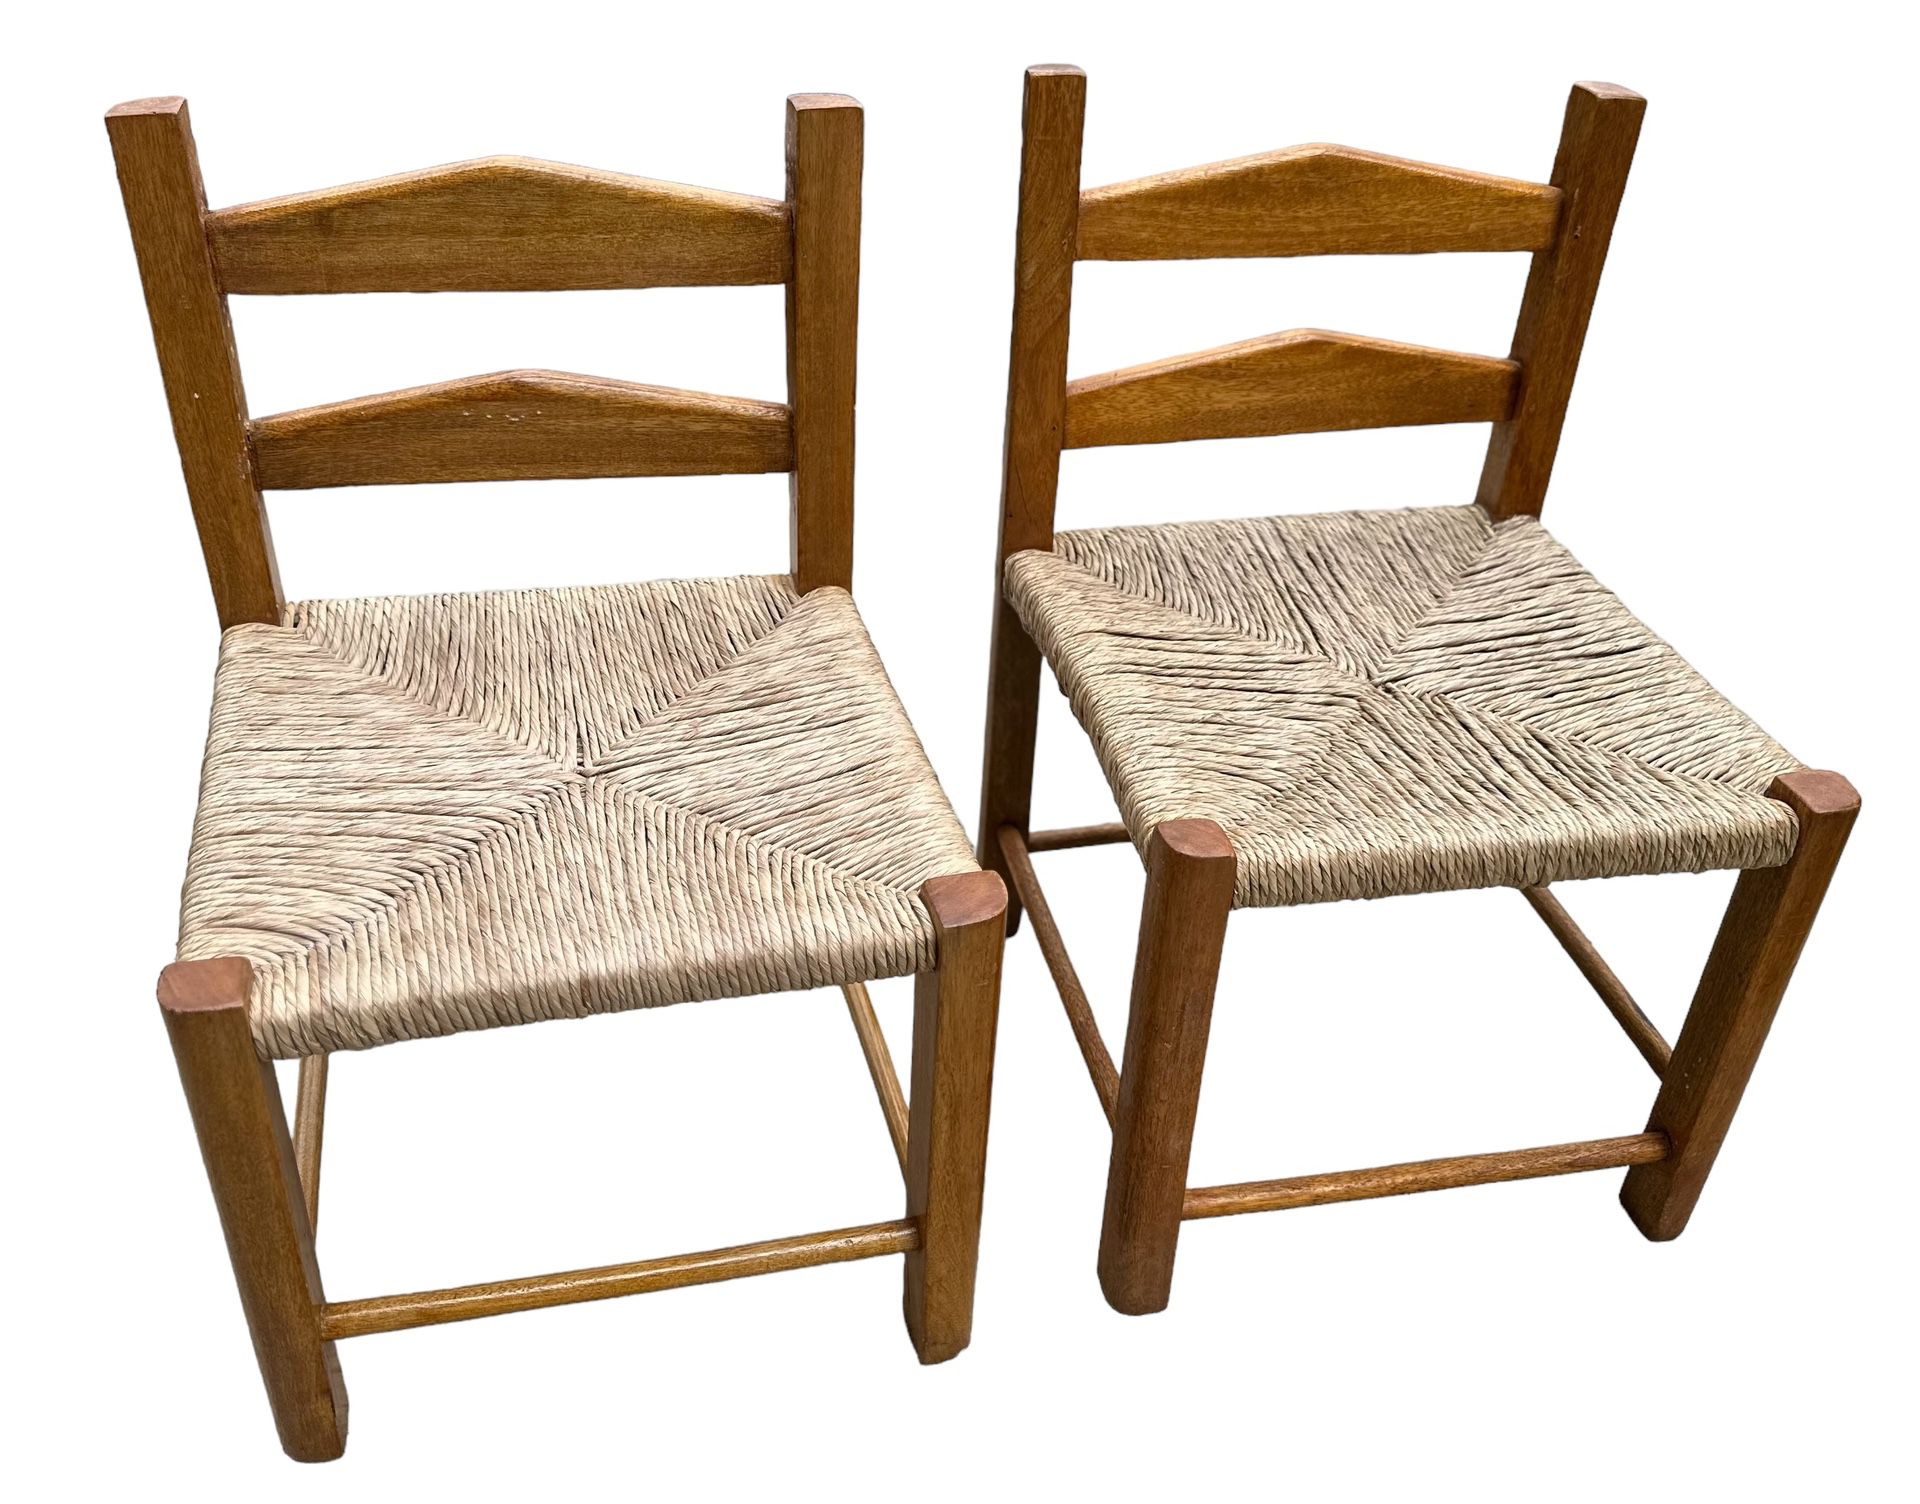 Vintage Set Of 2 Kids Rush Seat Chairs  Hand woven seats 